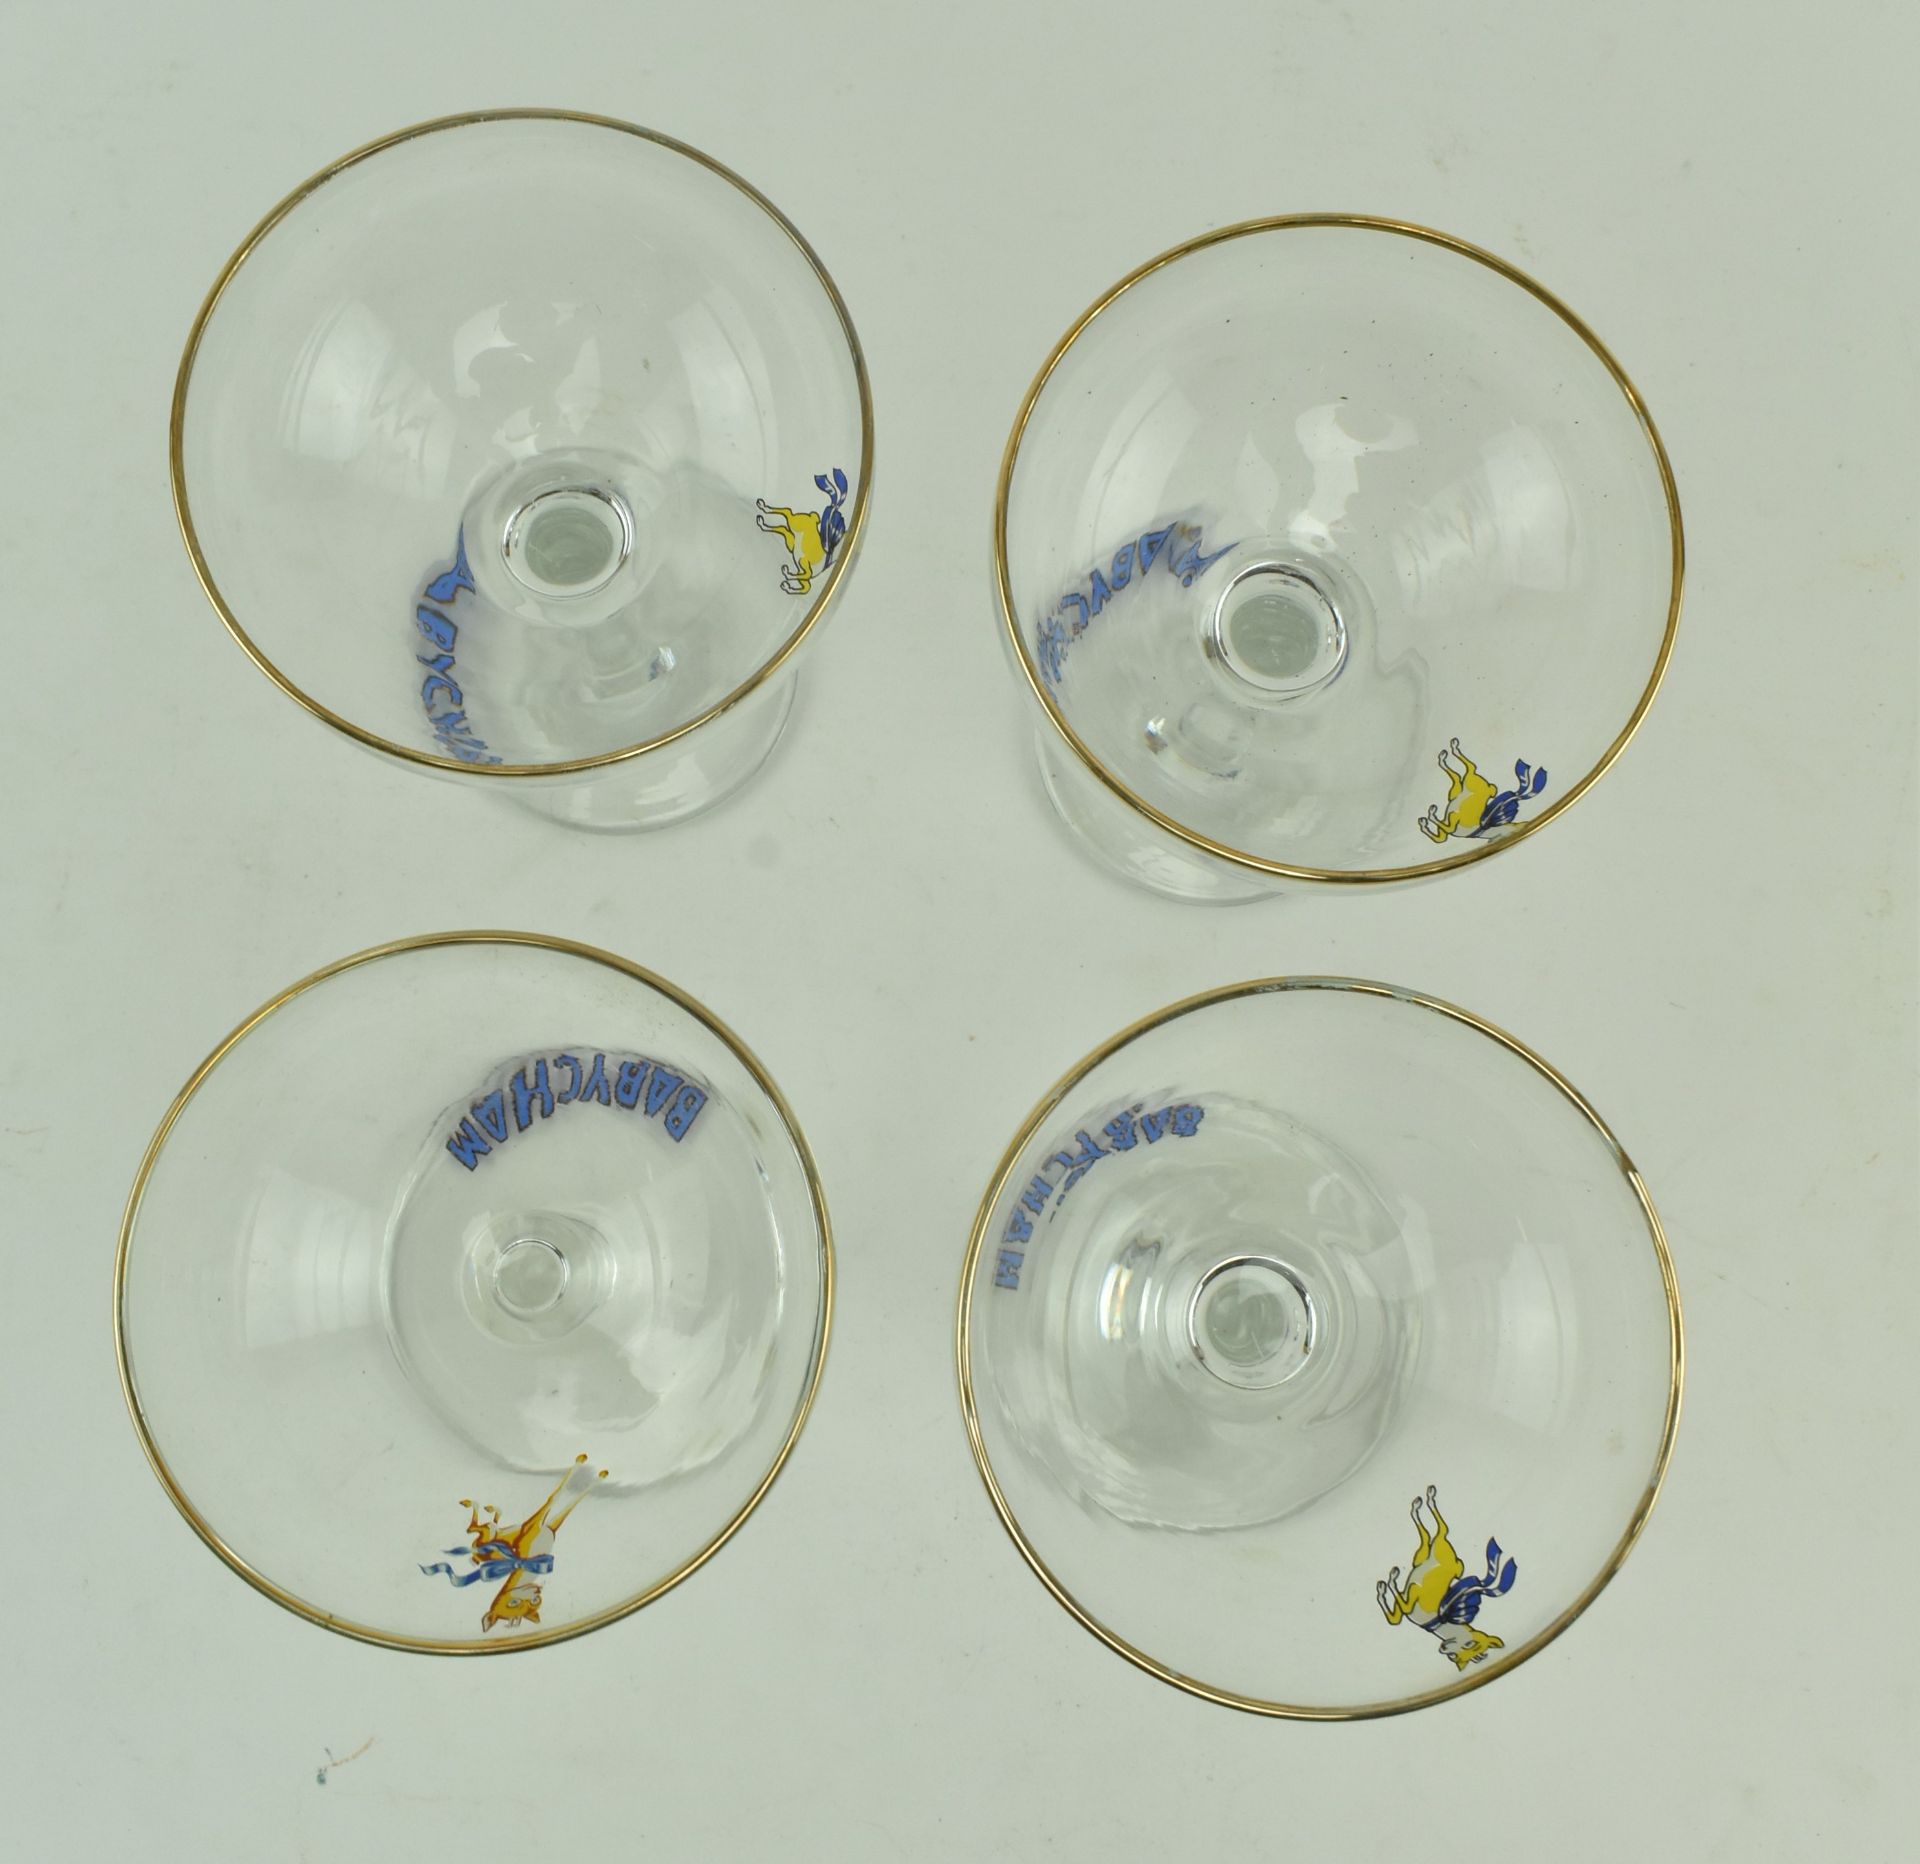 BABYCHAM - COLLECTION OF NINE VINTAGE CHAMPAGNE COUPES - Image 5 of 11